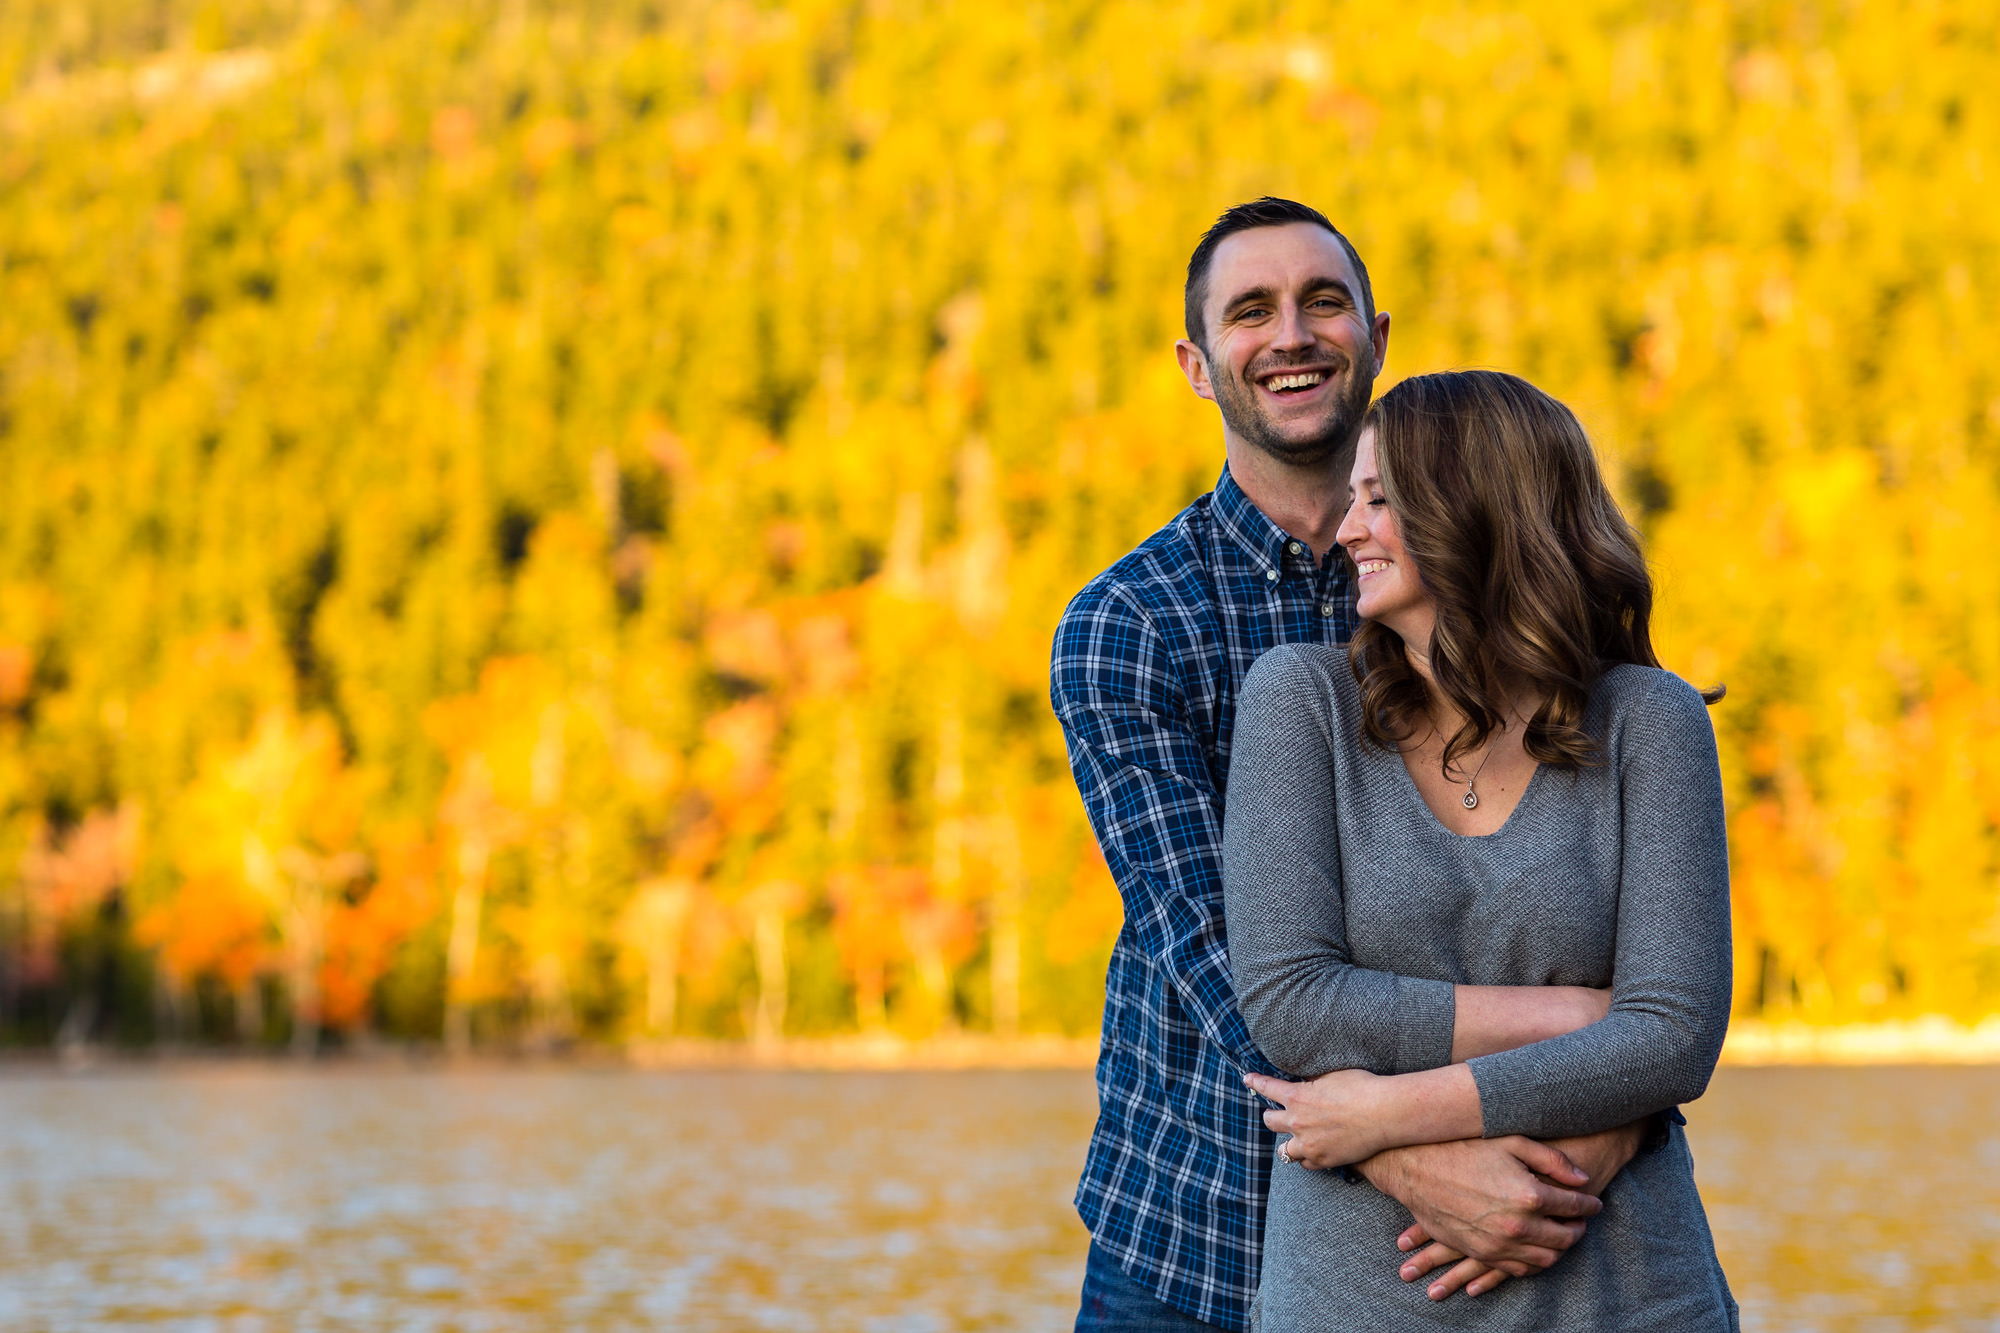 Beautiful fall foliage at Jordan Pond for Jaimie and Cory's engagement session at Jordan Pond